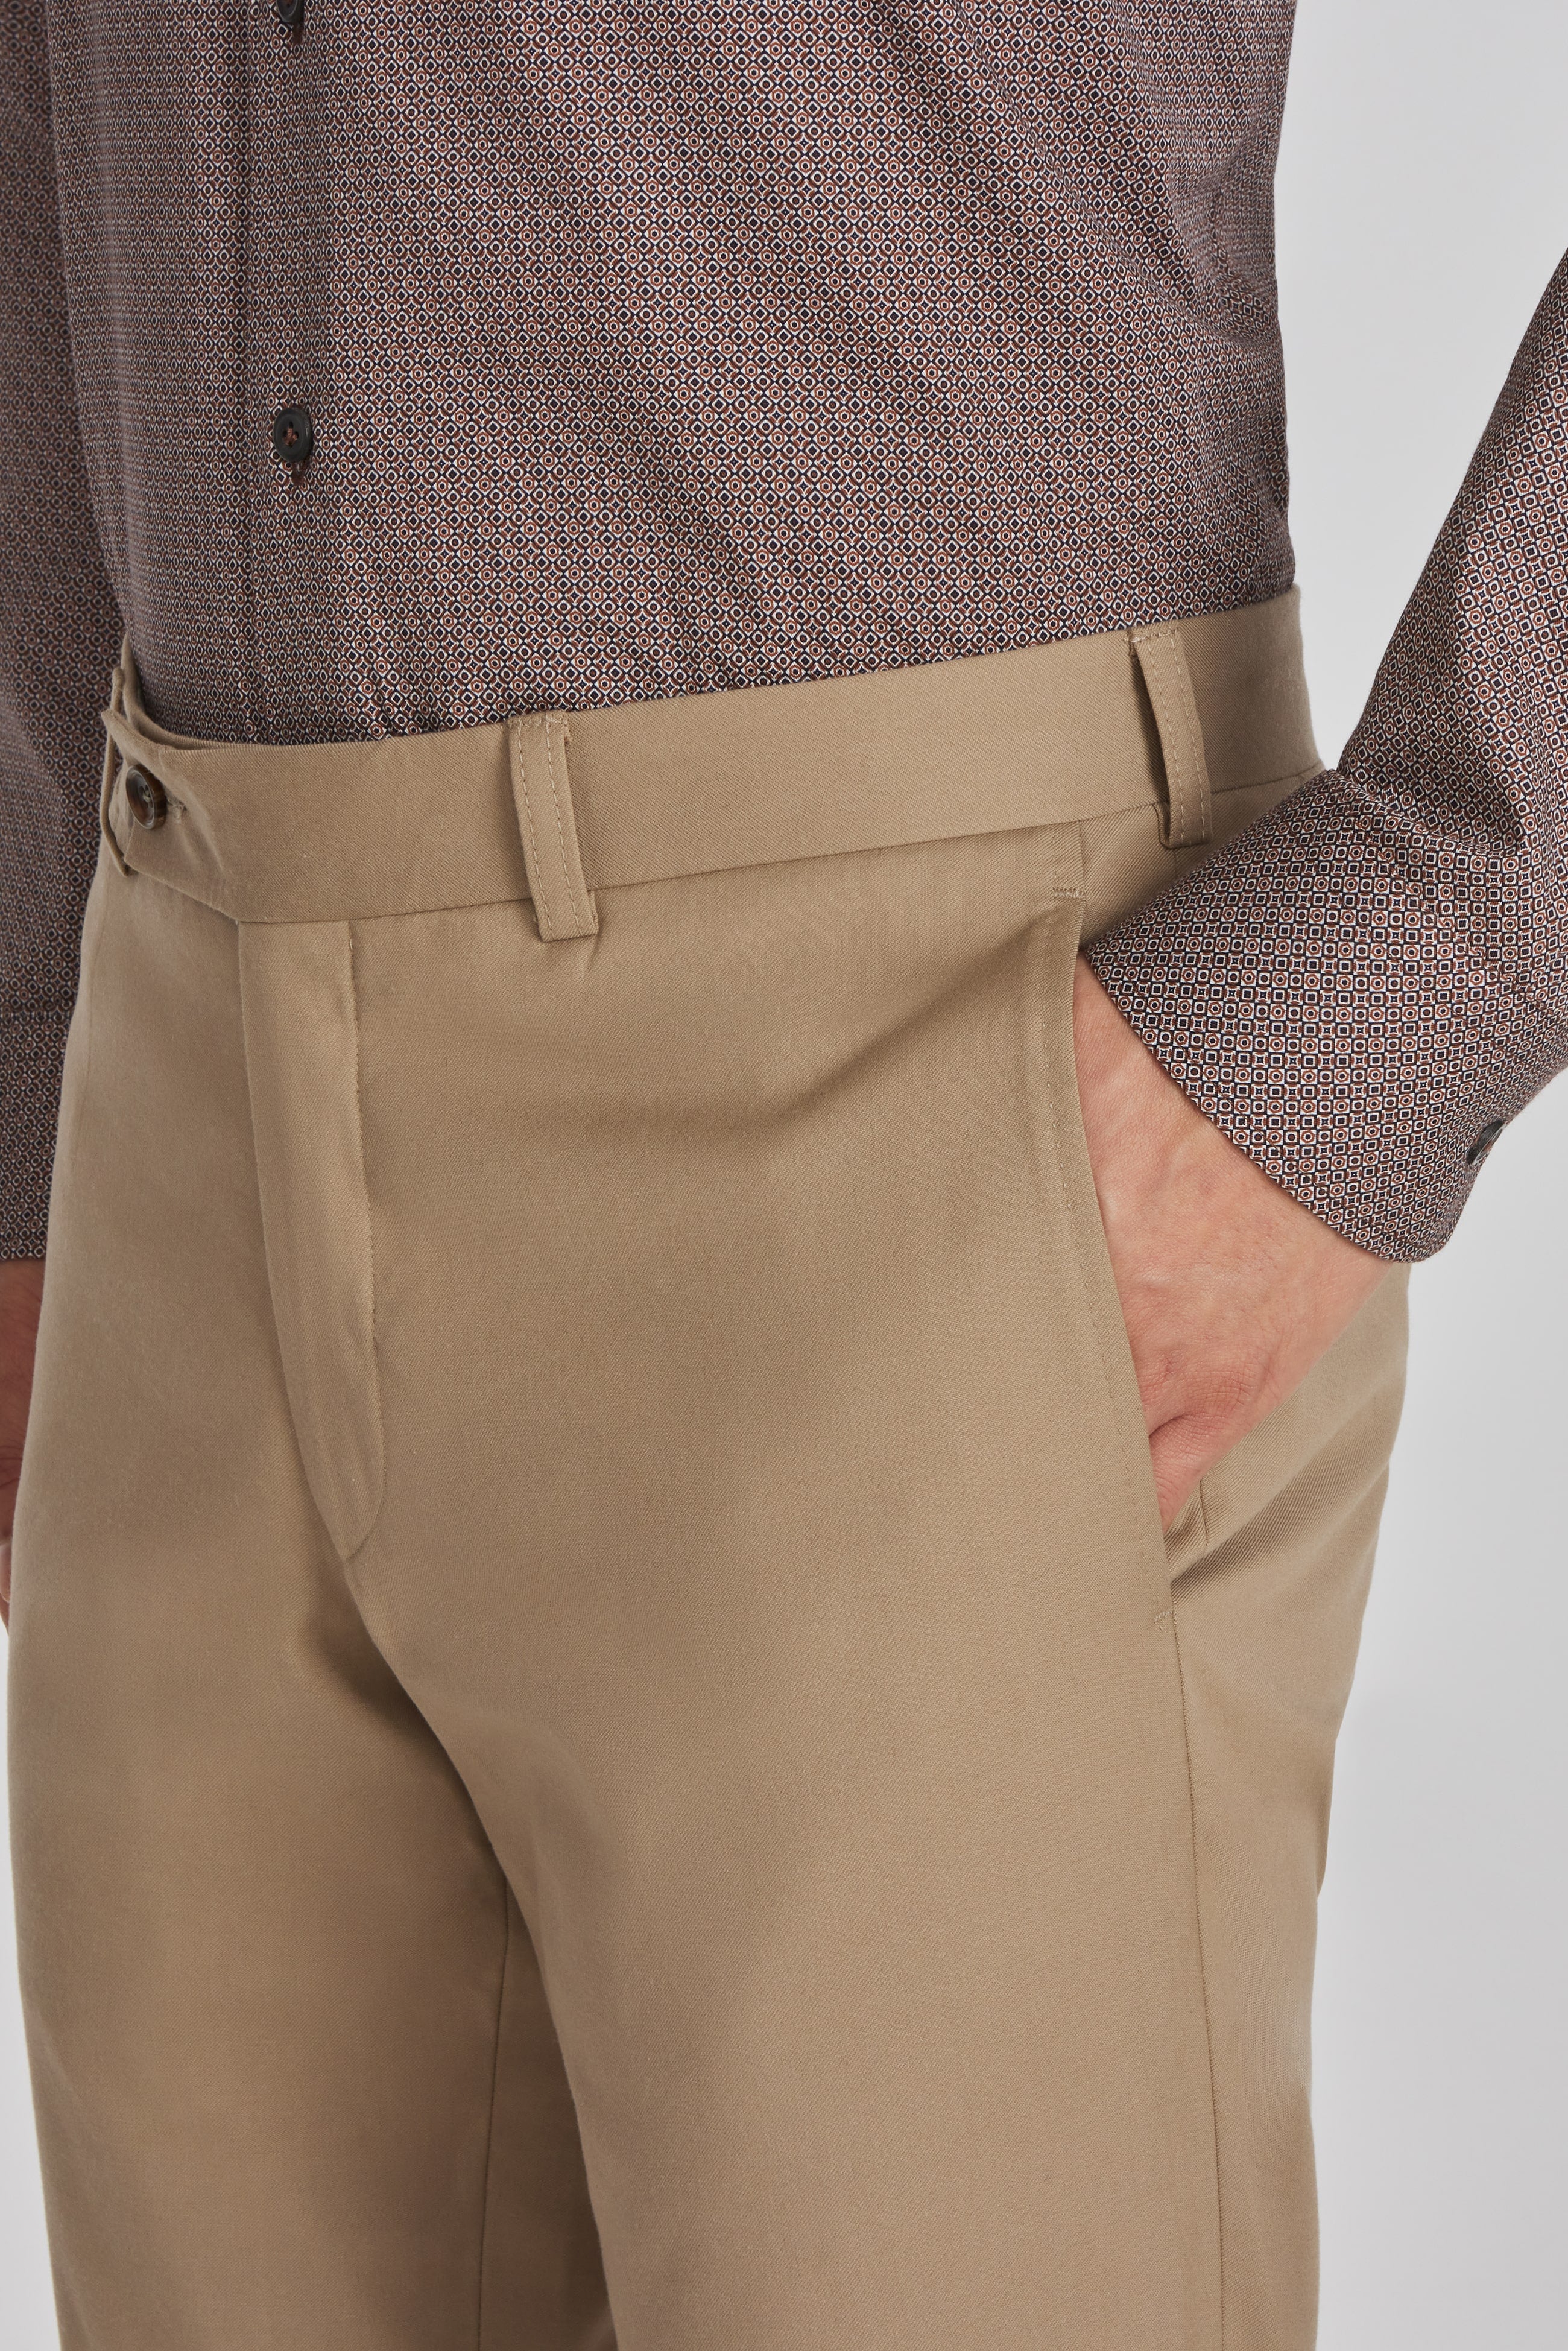 Alt view 1 Palmer Solid Cotton, Wool Stretch Trouser in Tan